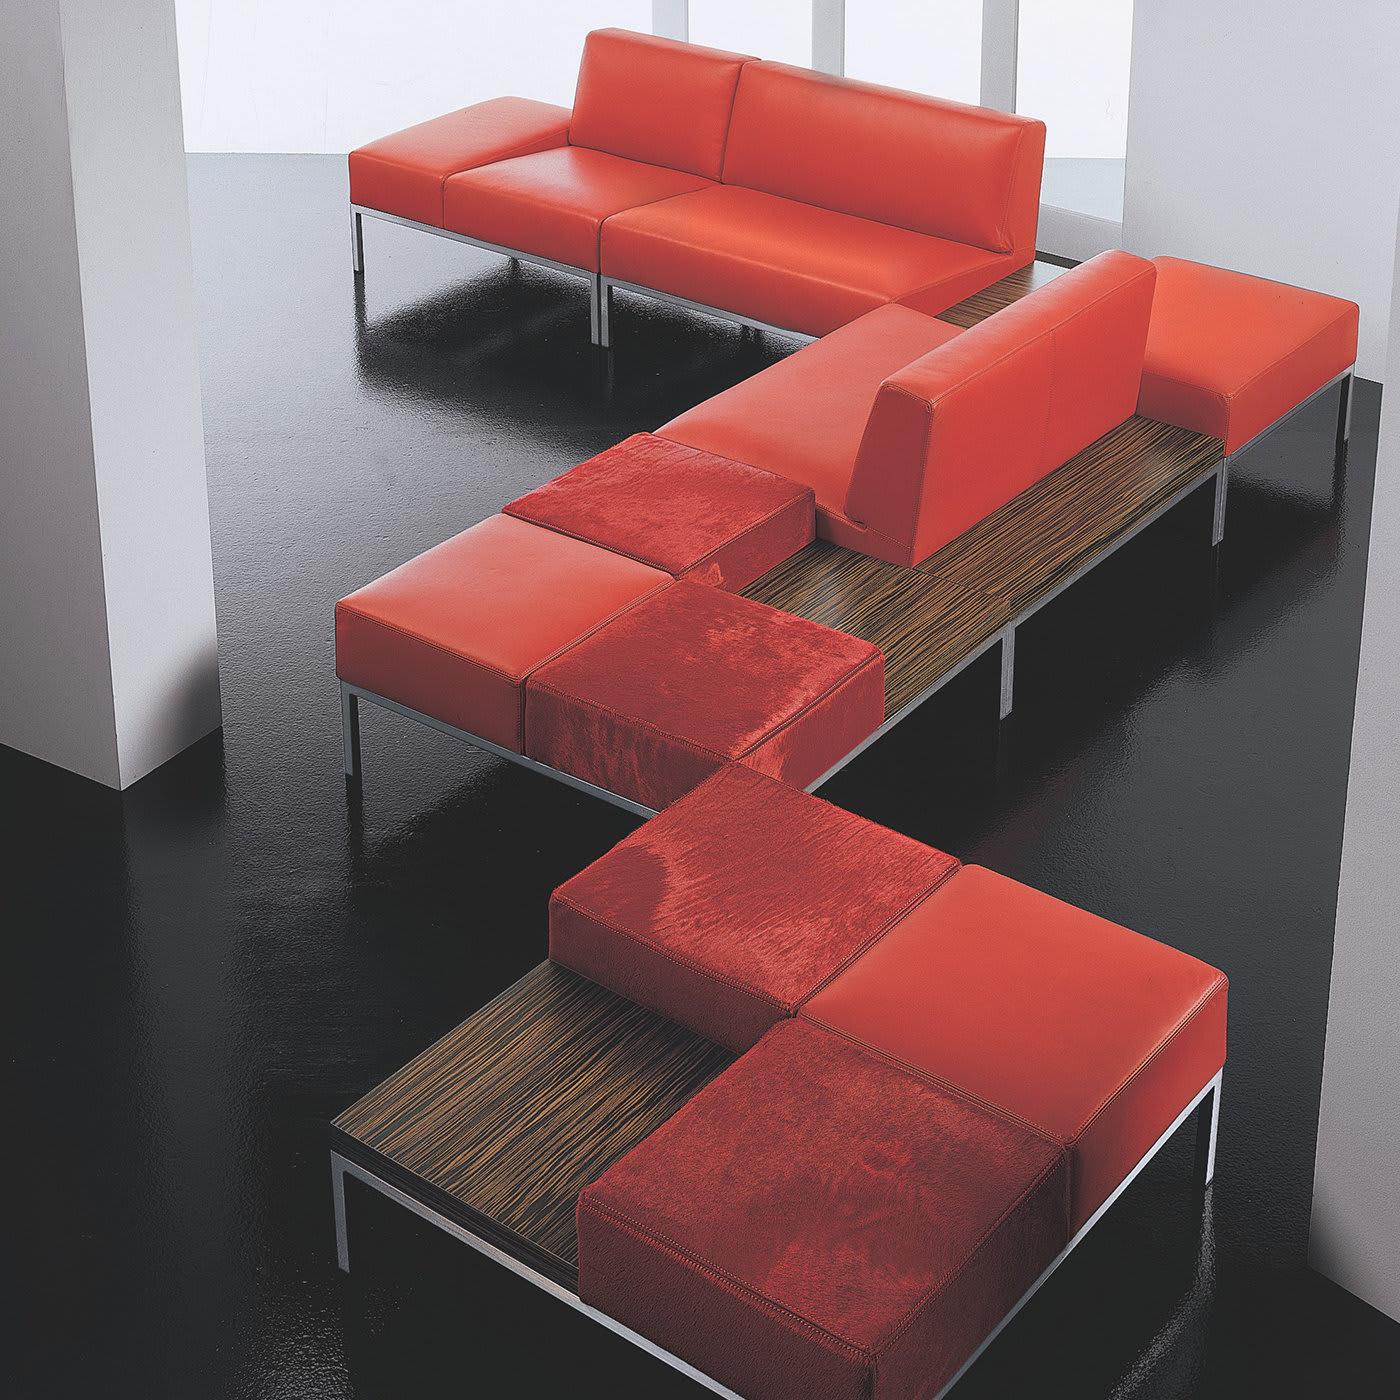 This modular pouf includes one integrated side table. The three seats of its chromed steel frame are covered in sophisticated, red pony hair with a lustrous sheen. The square side table measures 50x50 cm and features a veneered, zebra-striped